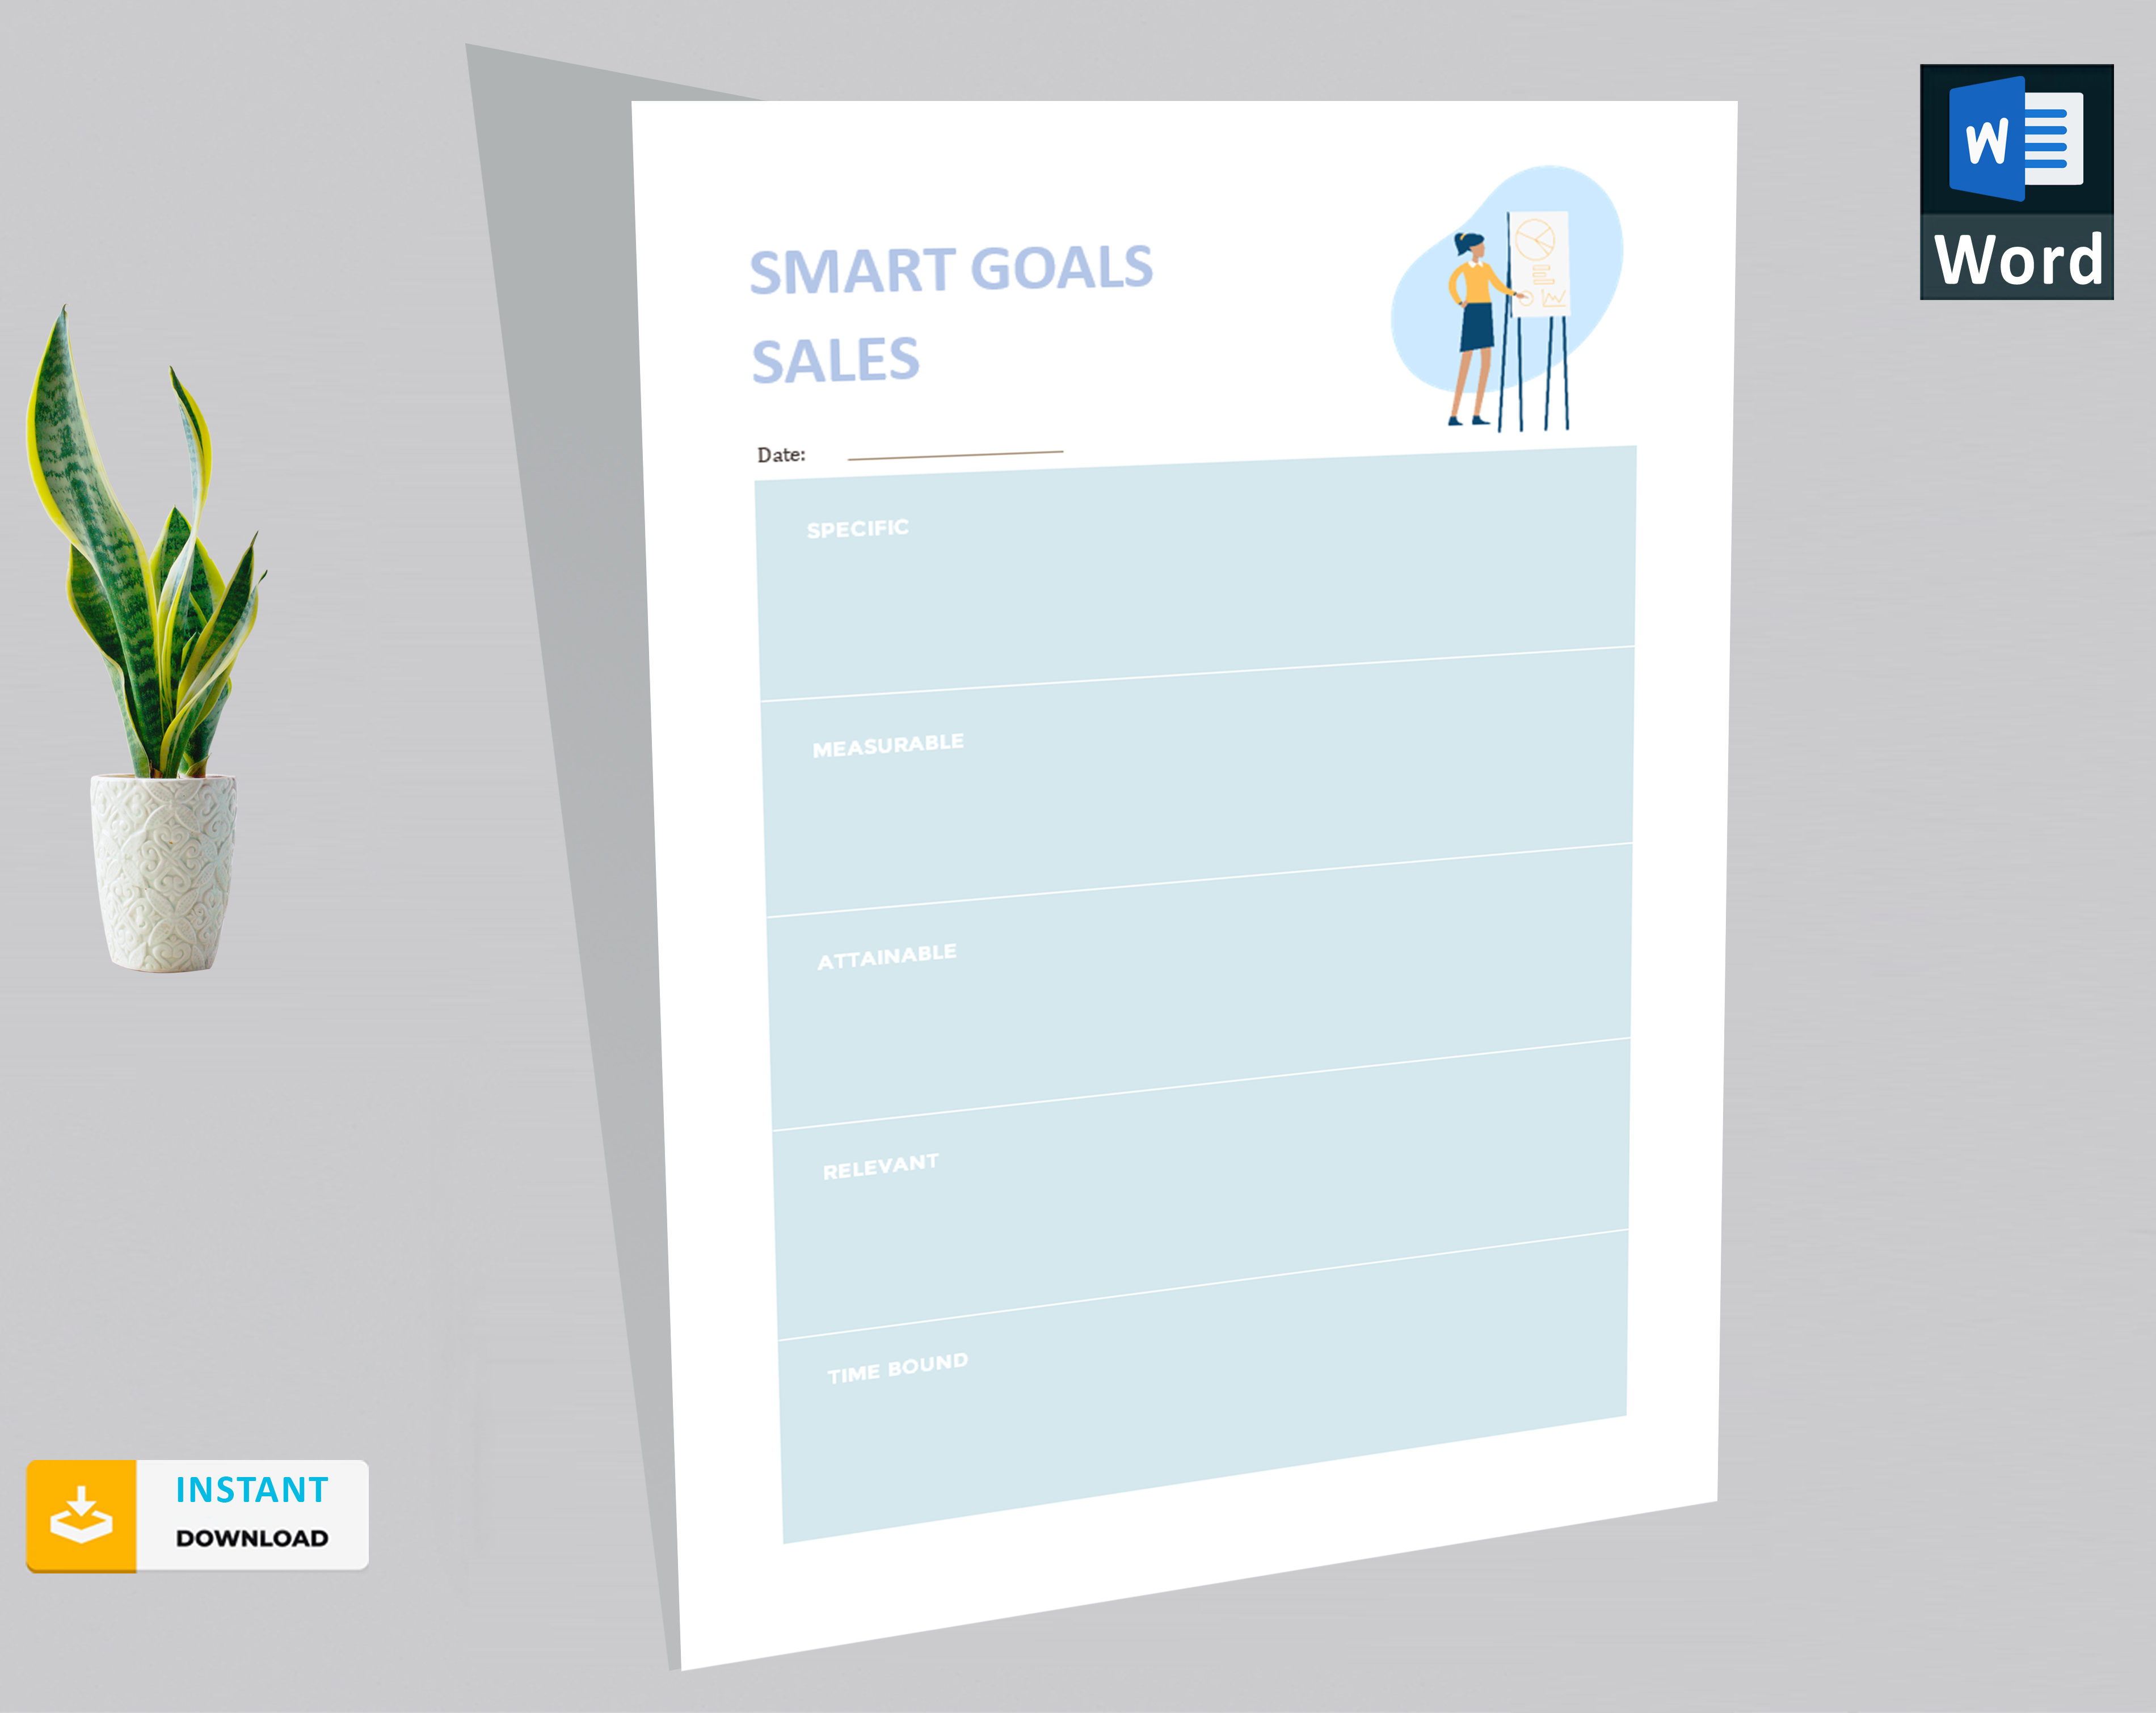 smart goals for sales template